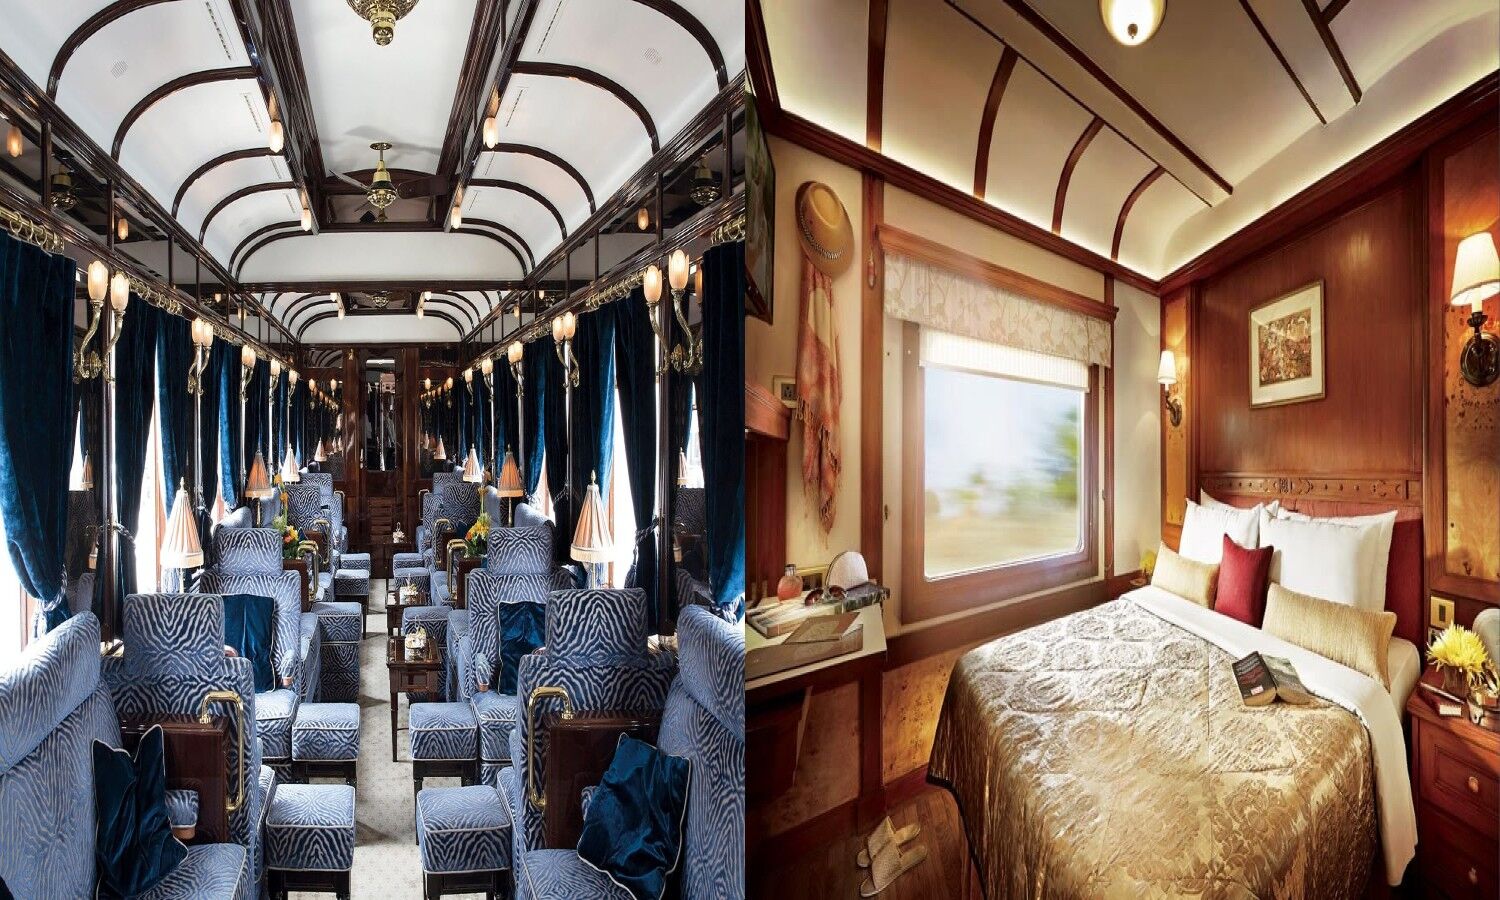 World’s Most Expensive Trains: These are the world’s most expensive trains with royal style, feel like a palace inside